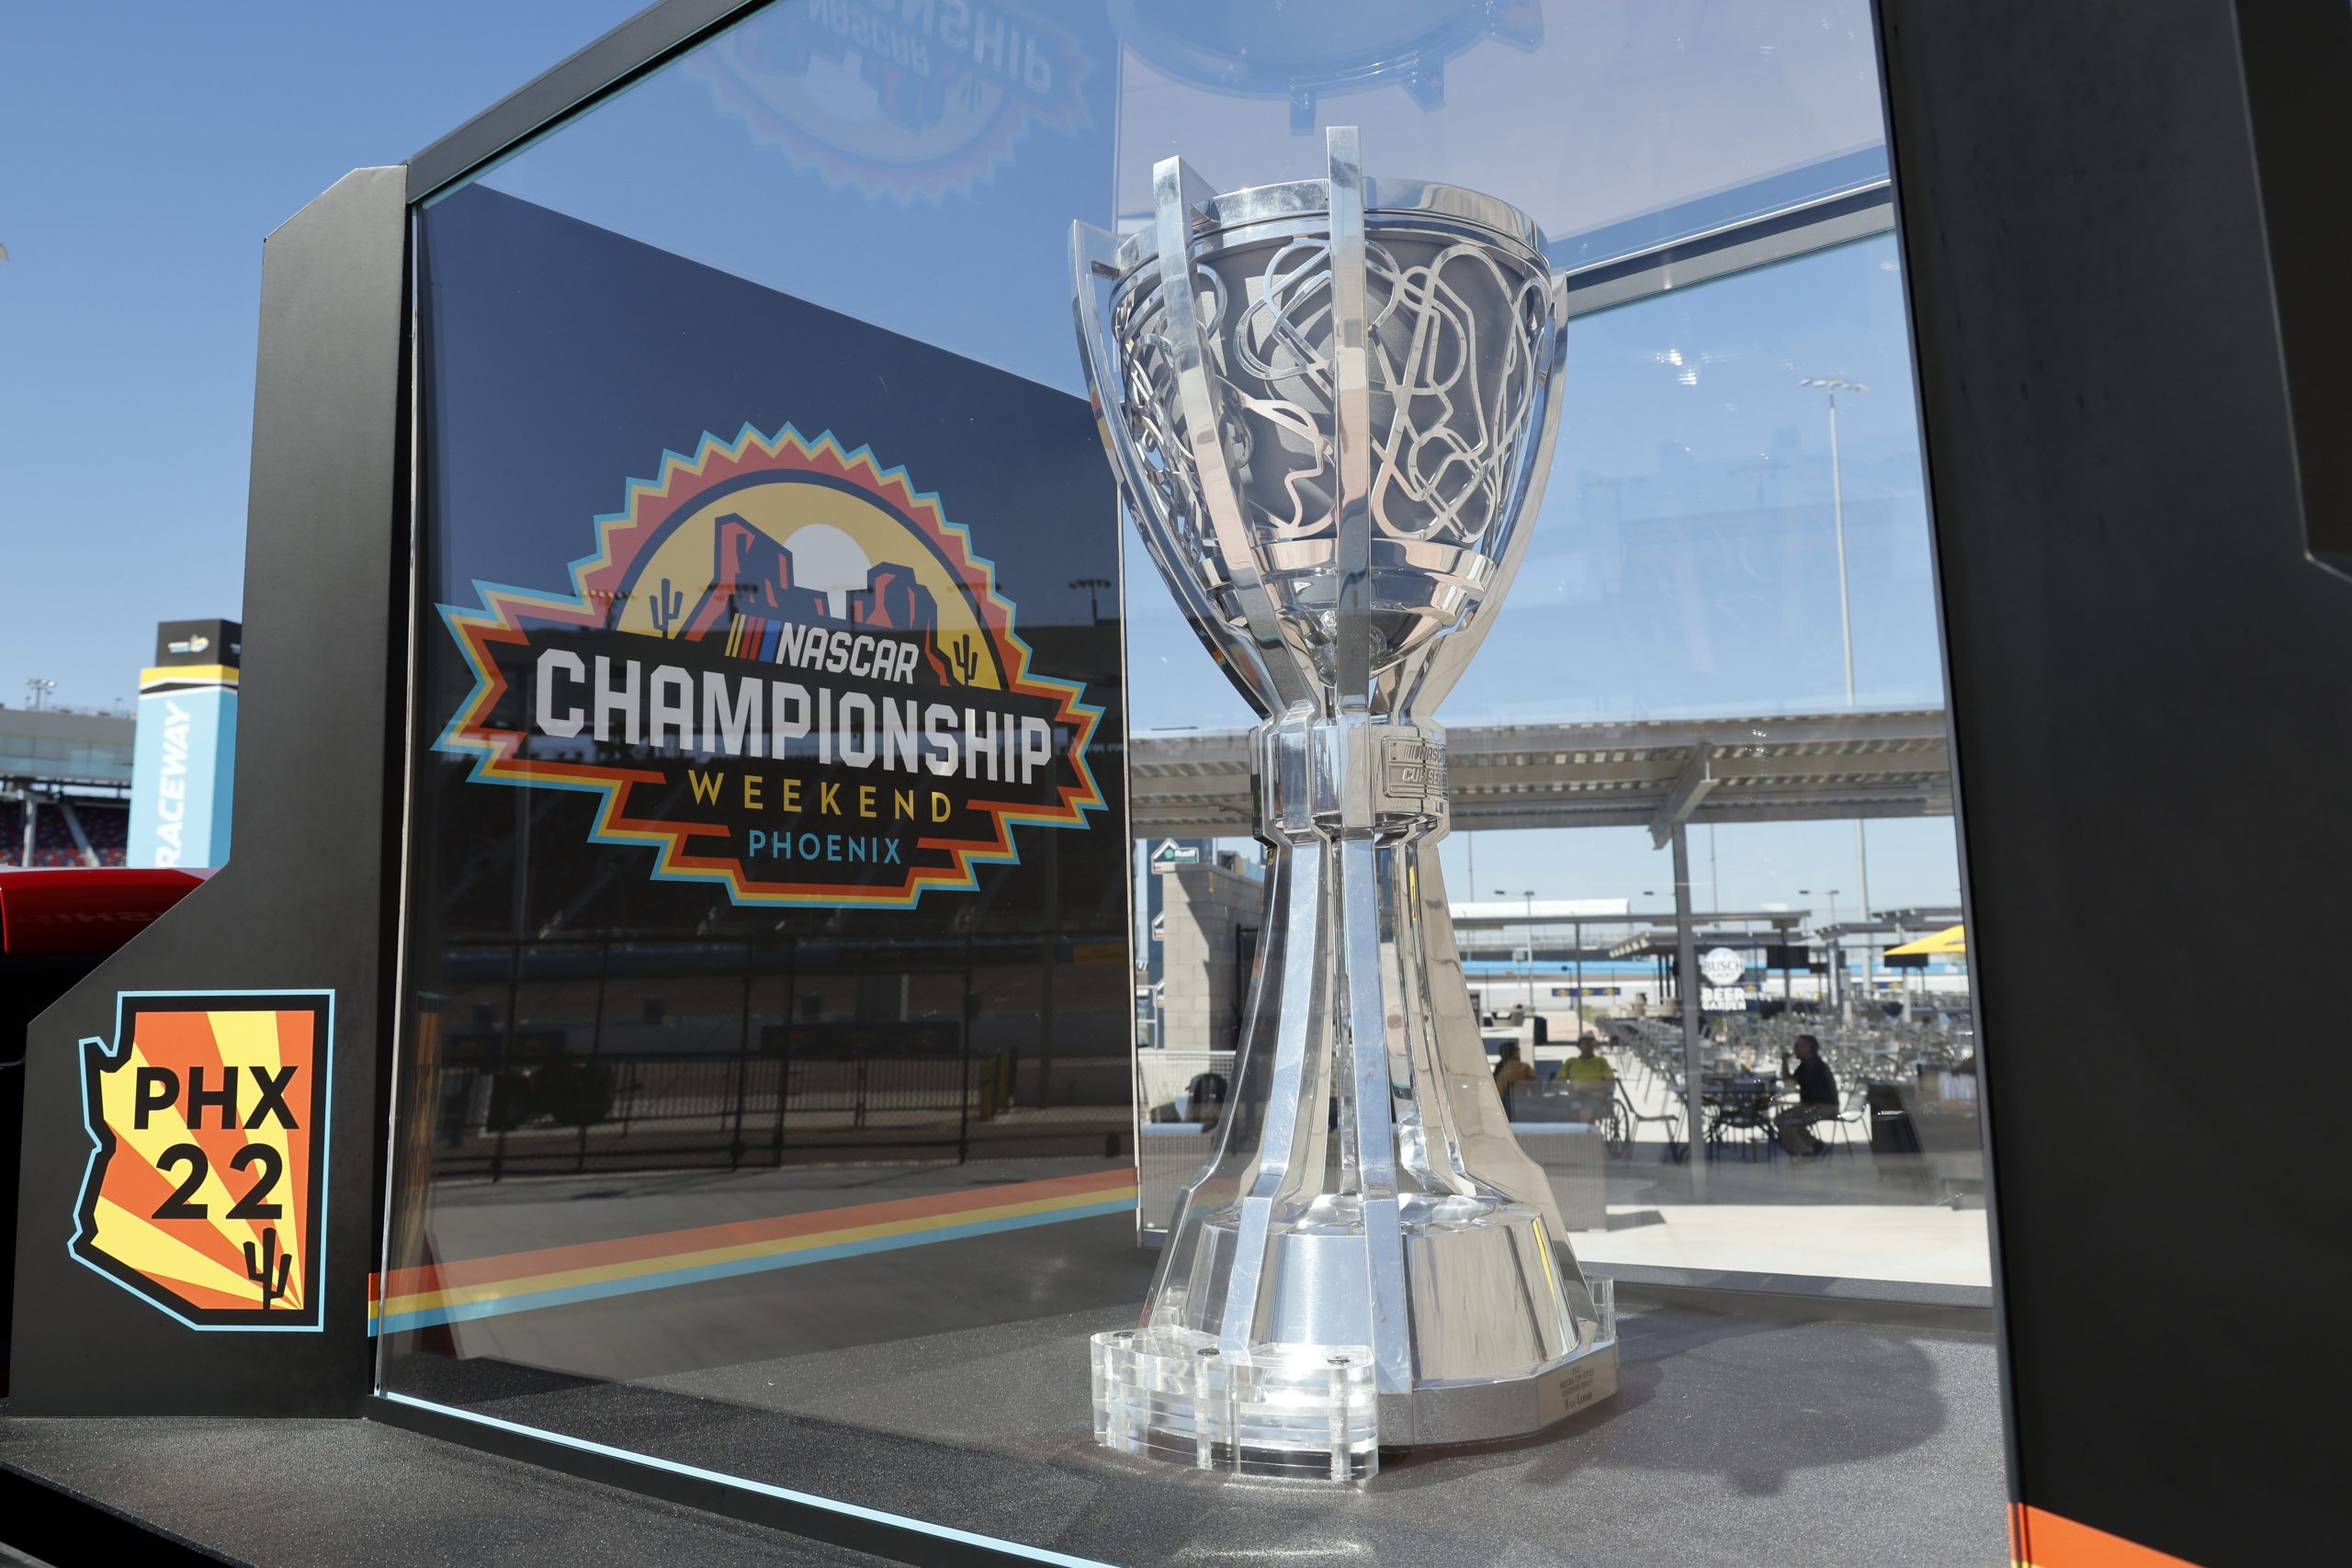 AVONDALE, ARIZONA - OCTOBER 21: A detail view of the Bill France 2021 NASCAR Cup Series Championship trophy during the NASCAR Racing Experience Event at Phoenix Raceway on October 21, 2022 in Avondale, Arizona. (Photo by Chris Coduto/Getty Images)